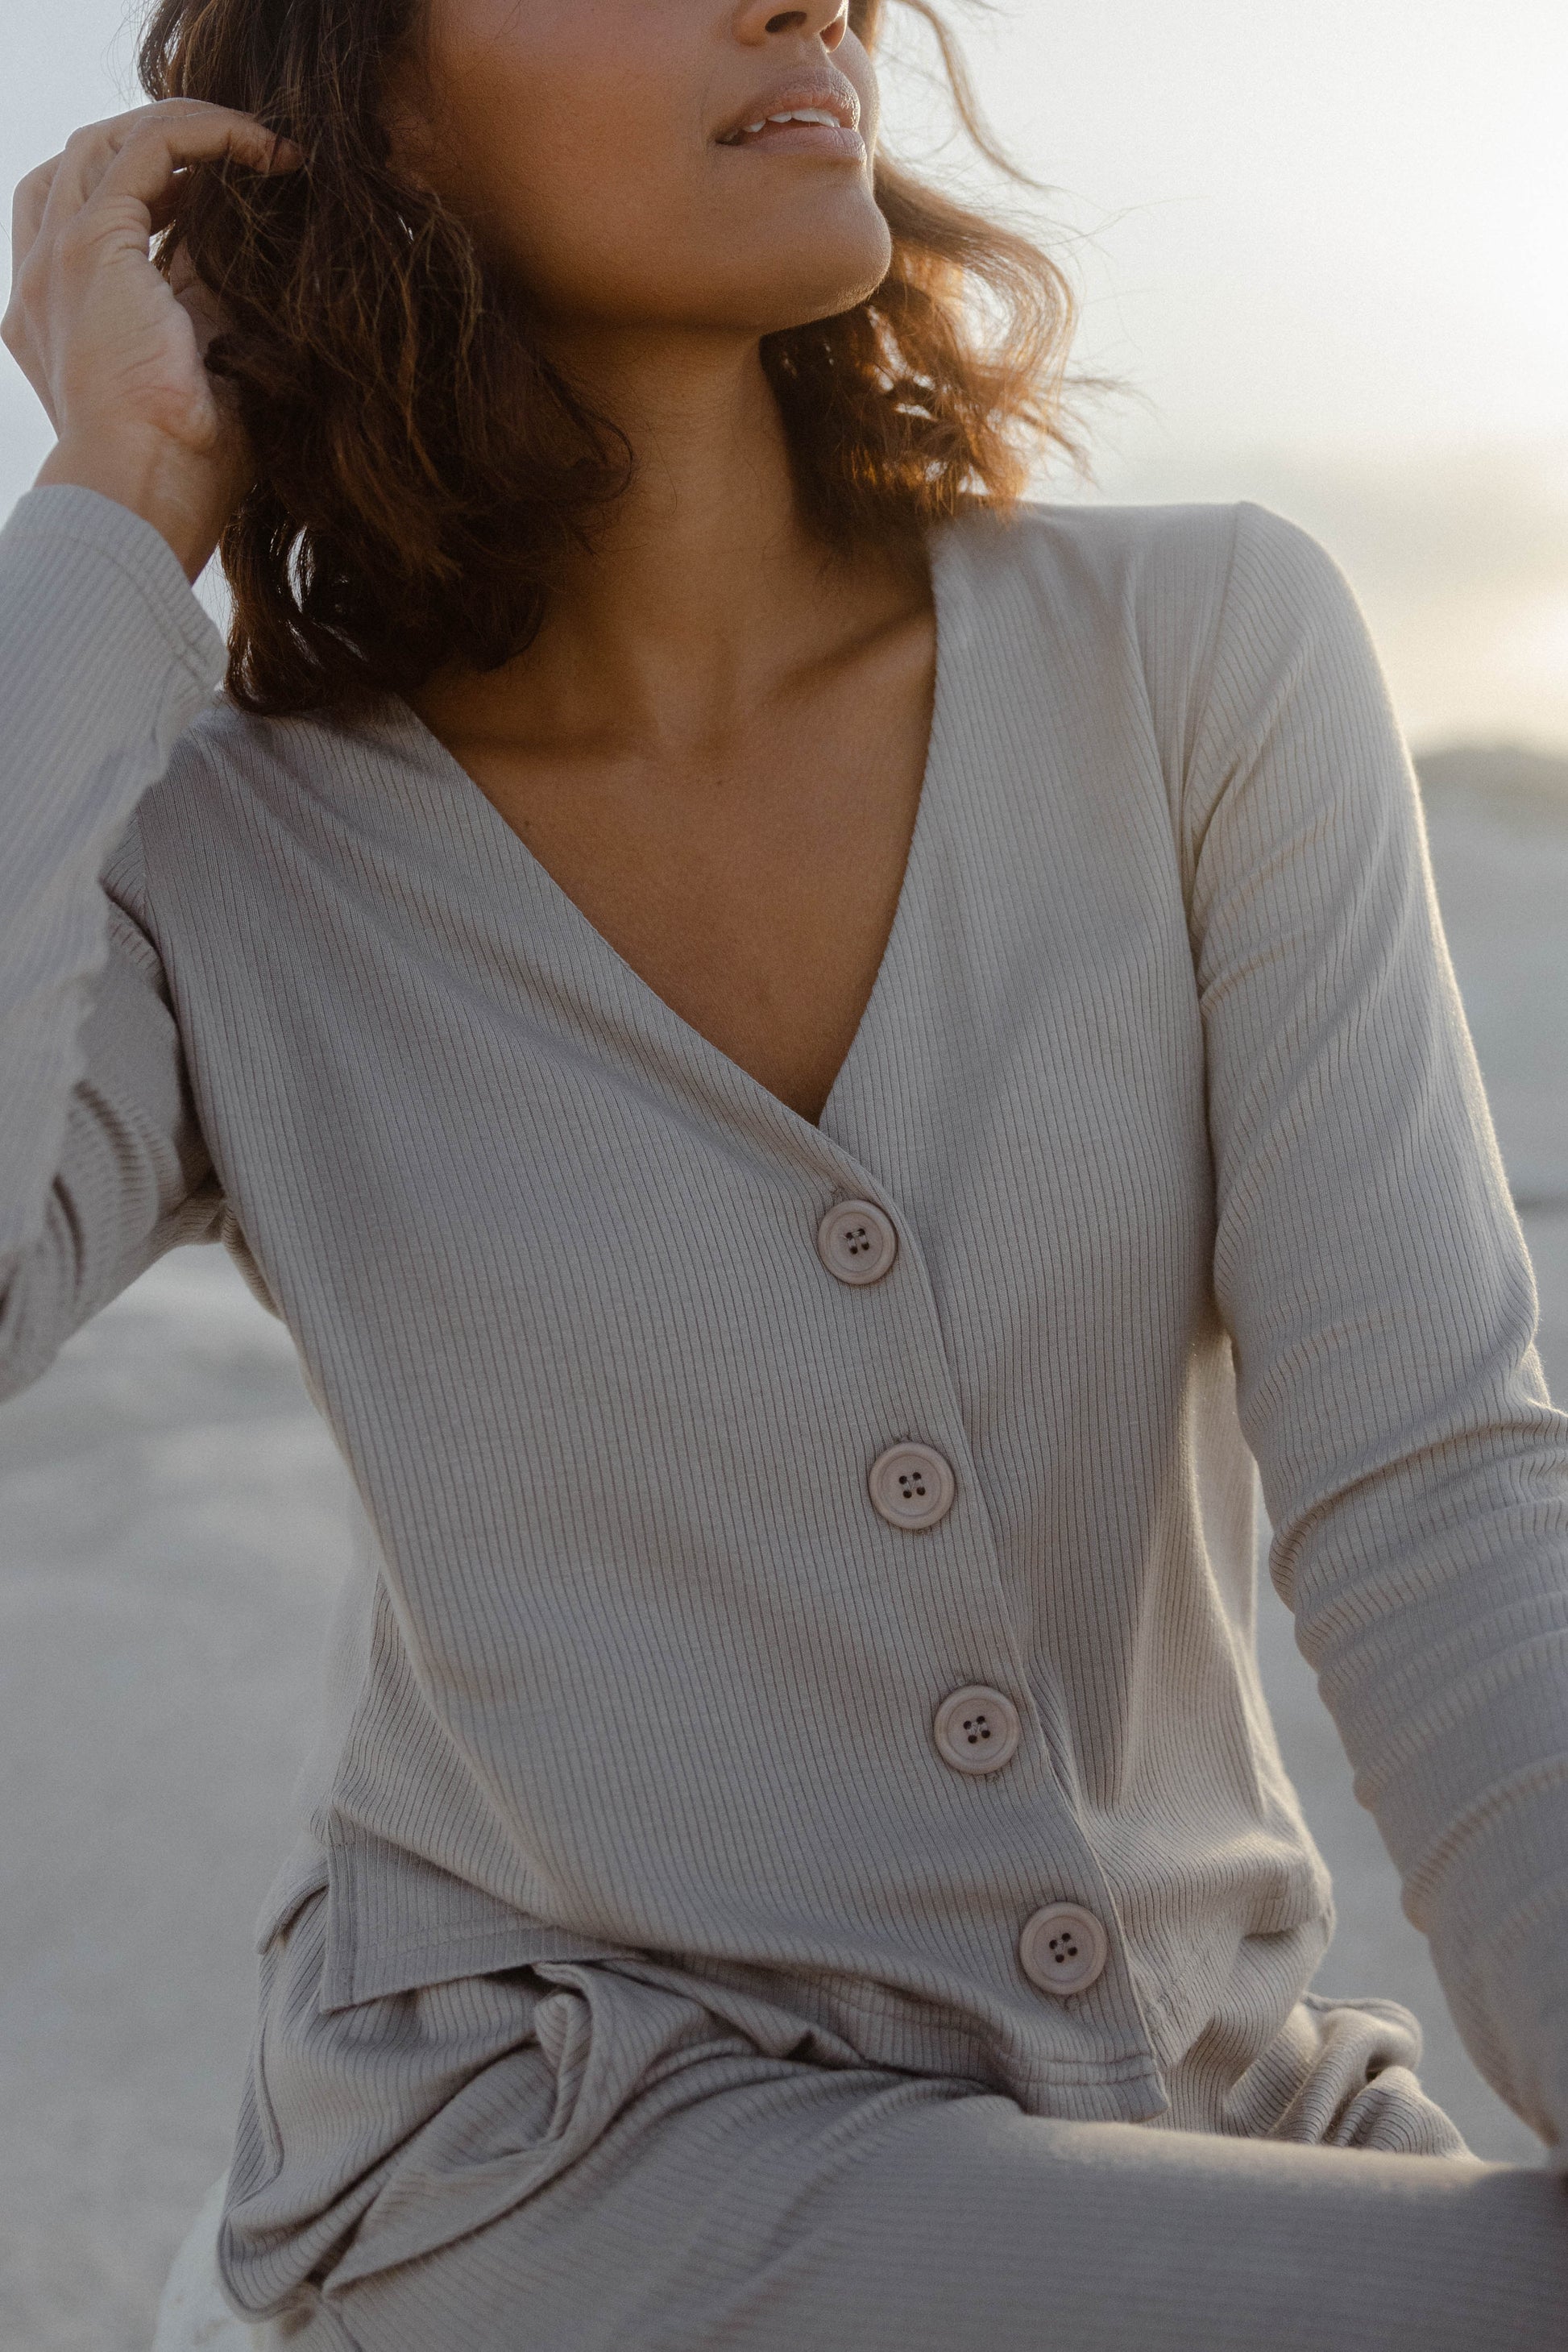 This 'Abby’ top is made from ribbed stretch-knit that sits nicely around your frame and has buttons that can be adjusted to your preferred coverage. It pairs perfectly with the matching pants and also looks great with wide-leg jeans.